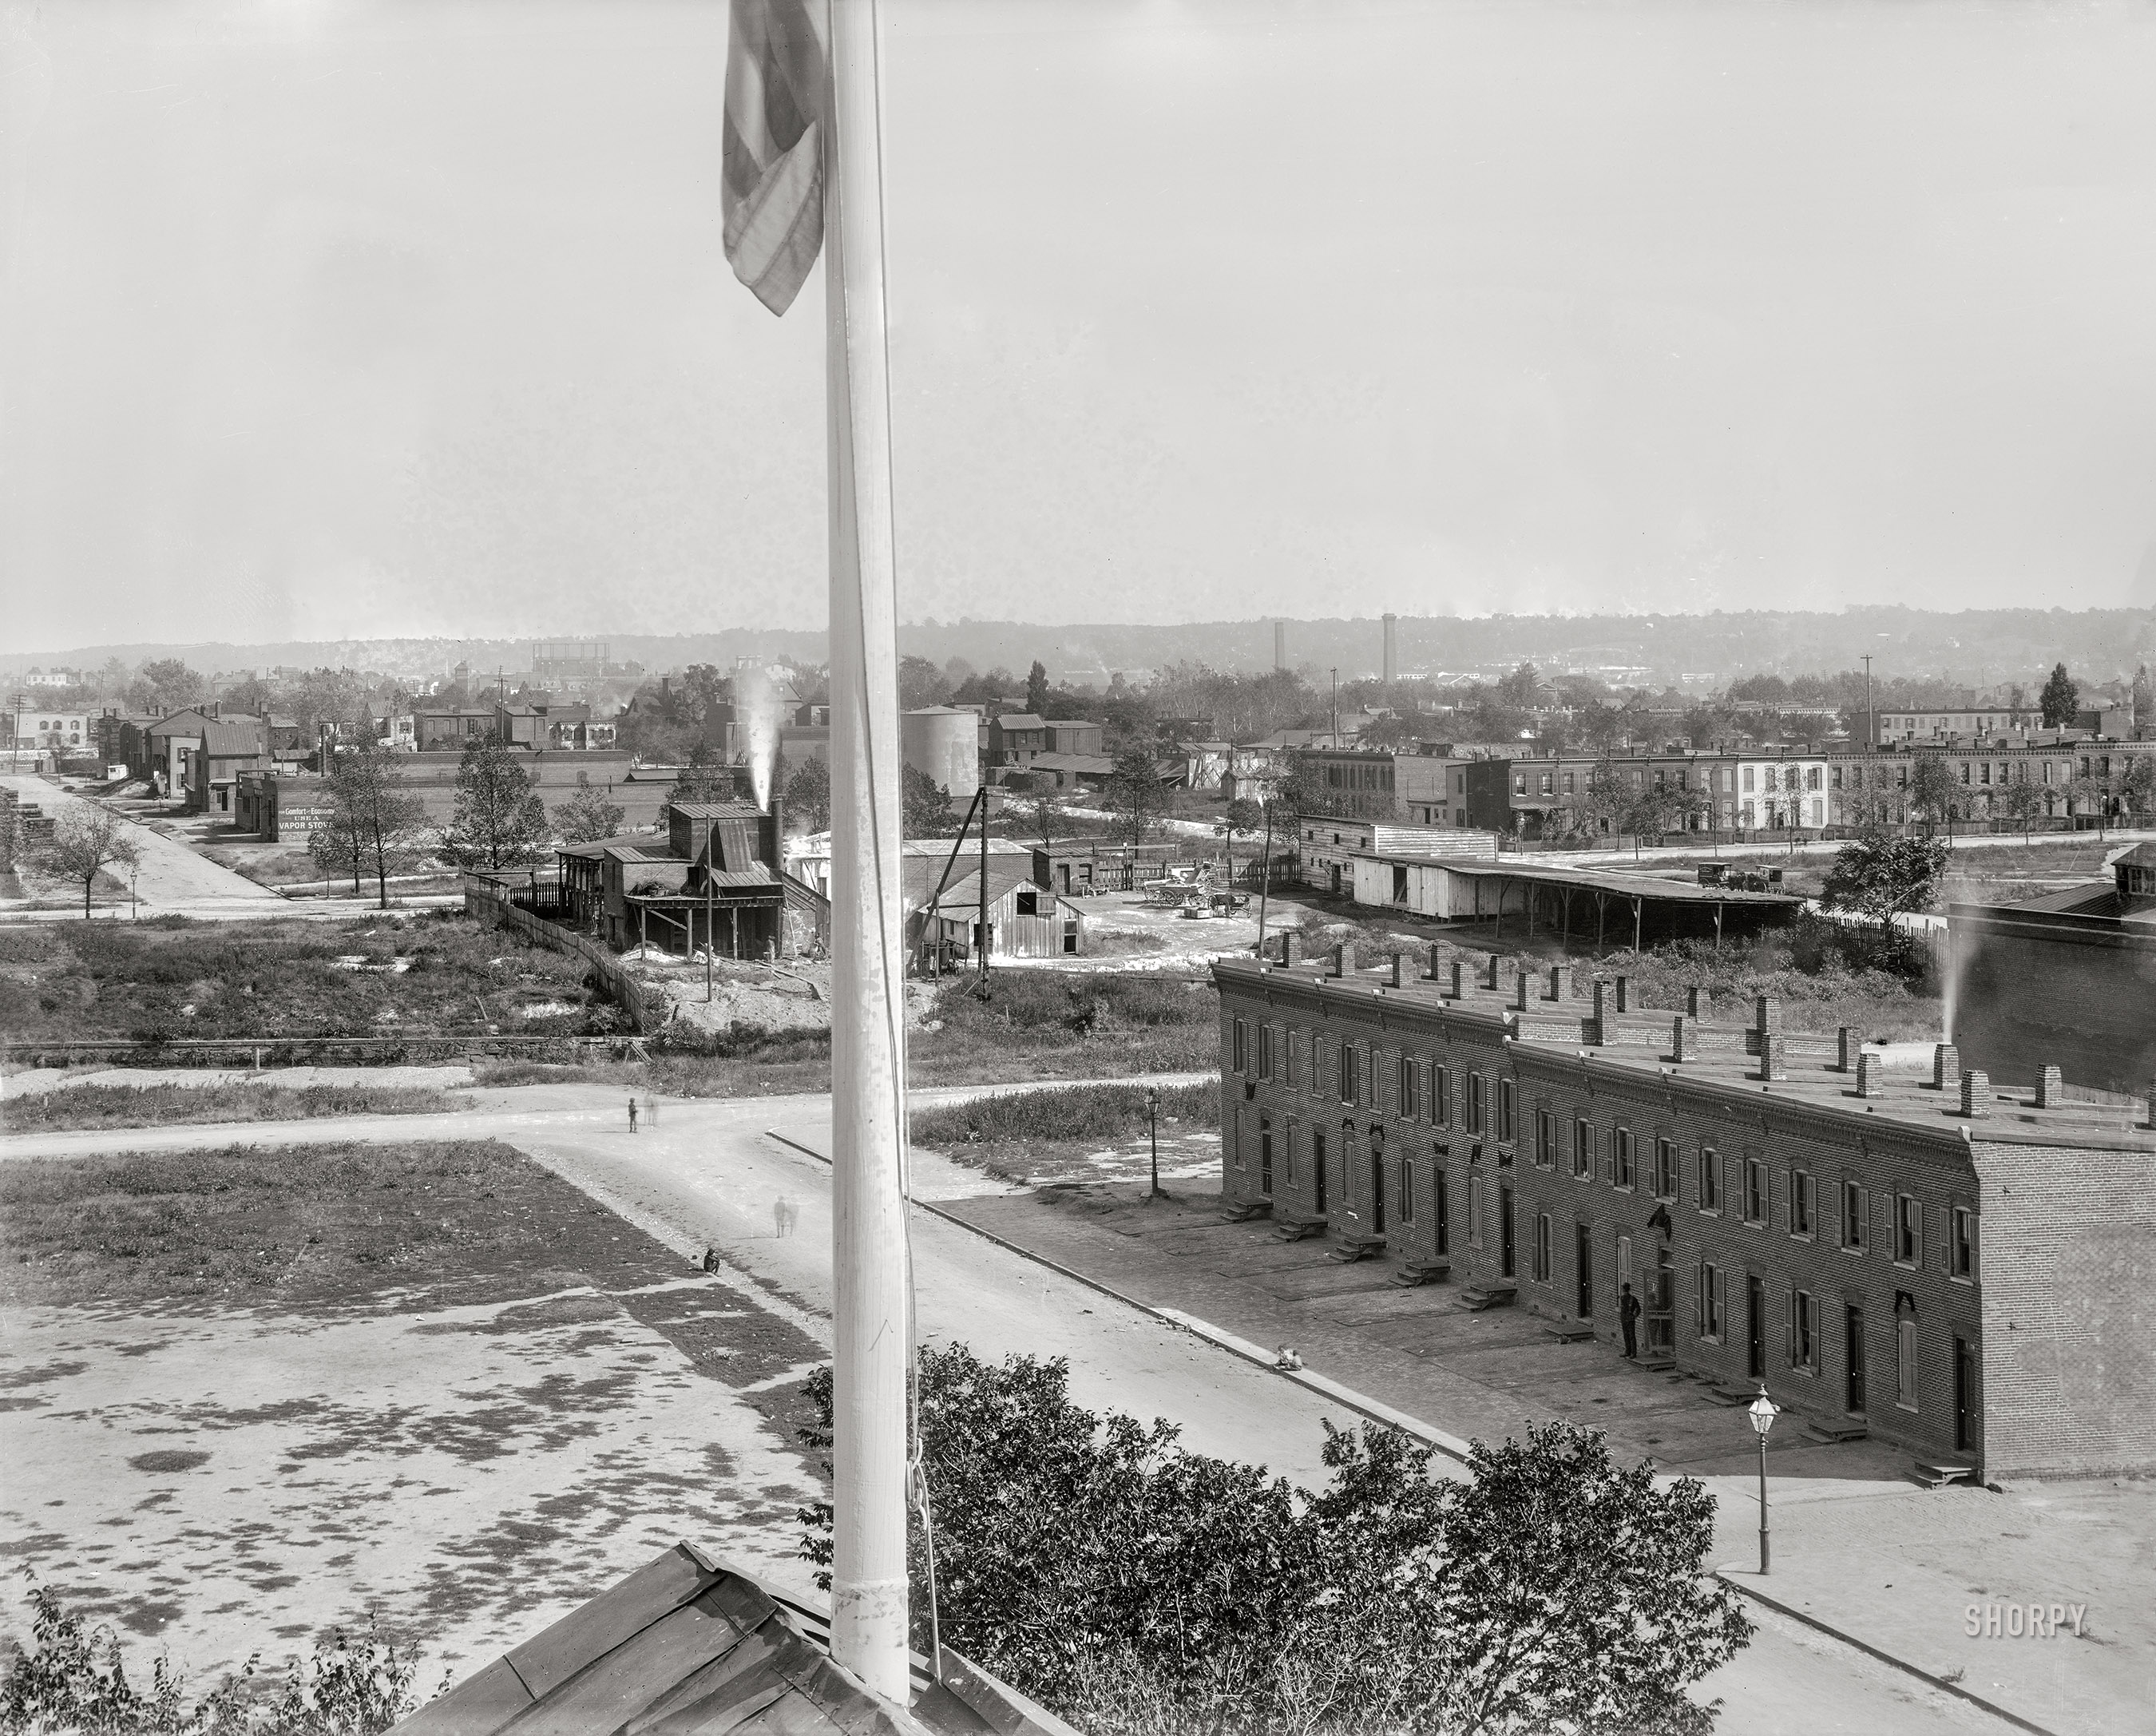 Washington, D.C., circa 1901. "An elevated view from the Randall School's roof looking east to southeast -- Half & South Capitol Streets, and I & K Streets." Our title can be found on the left side of this 8x10 glass plate negative from the D.C. Street Survey Collection. View full size.